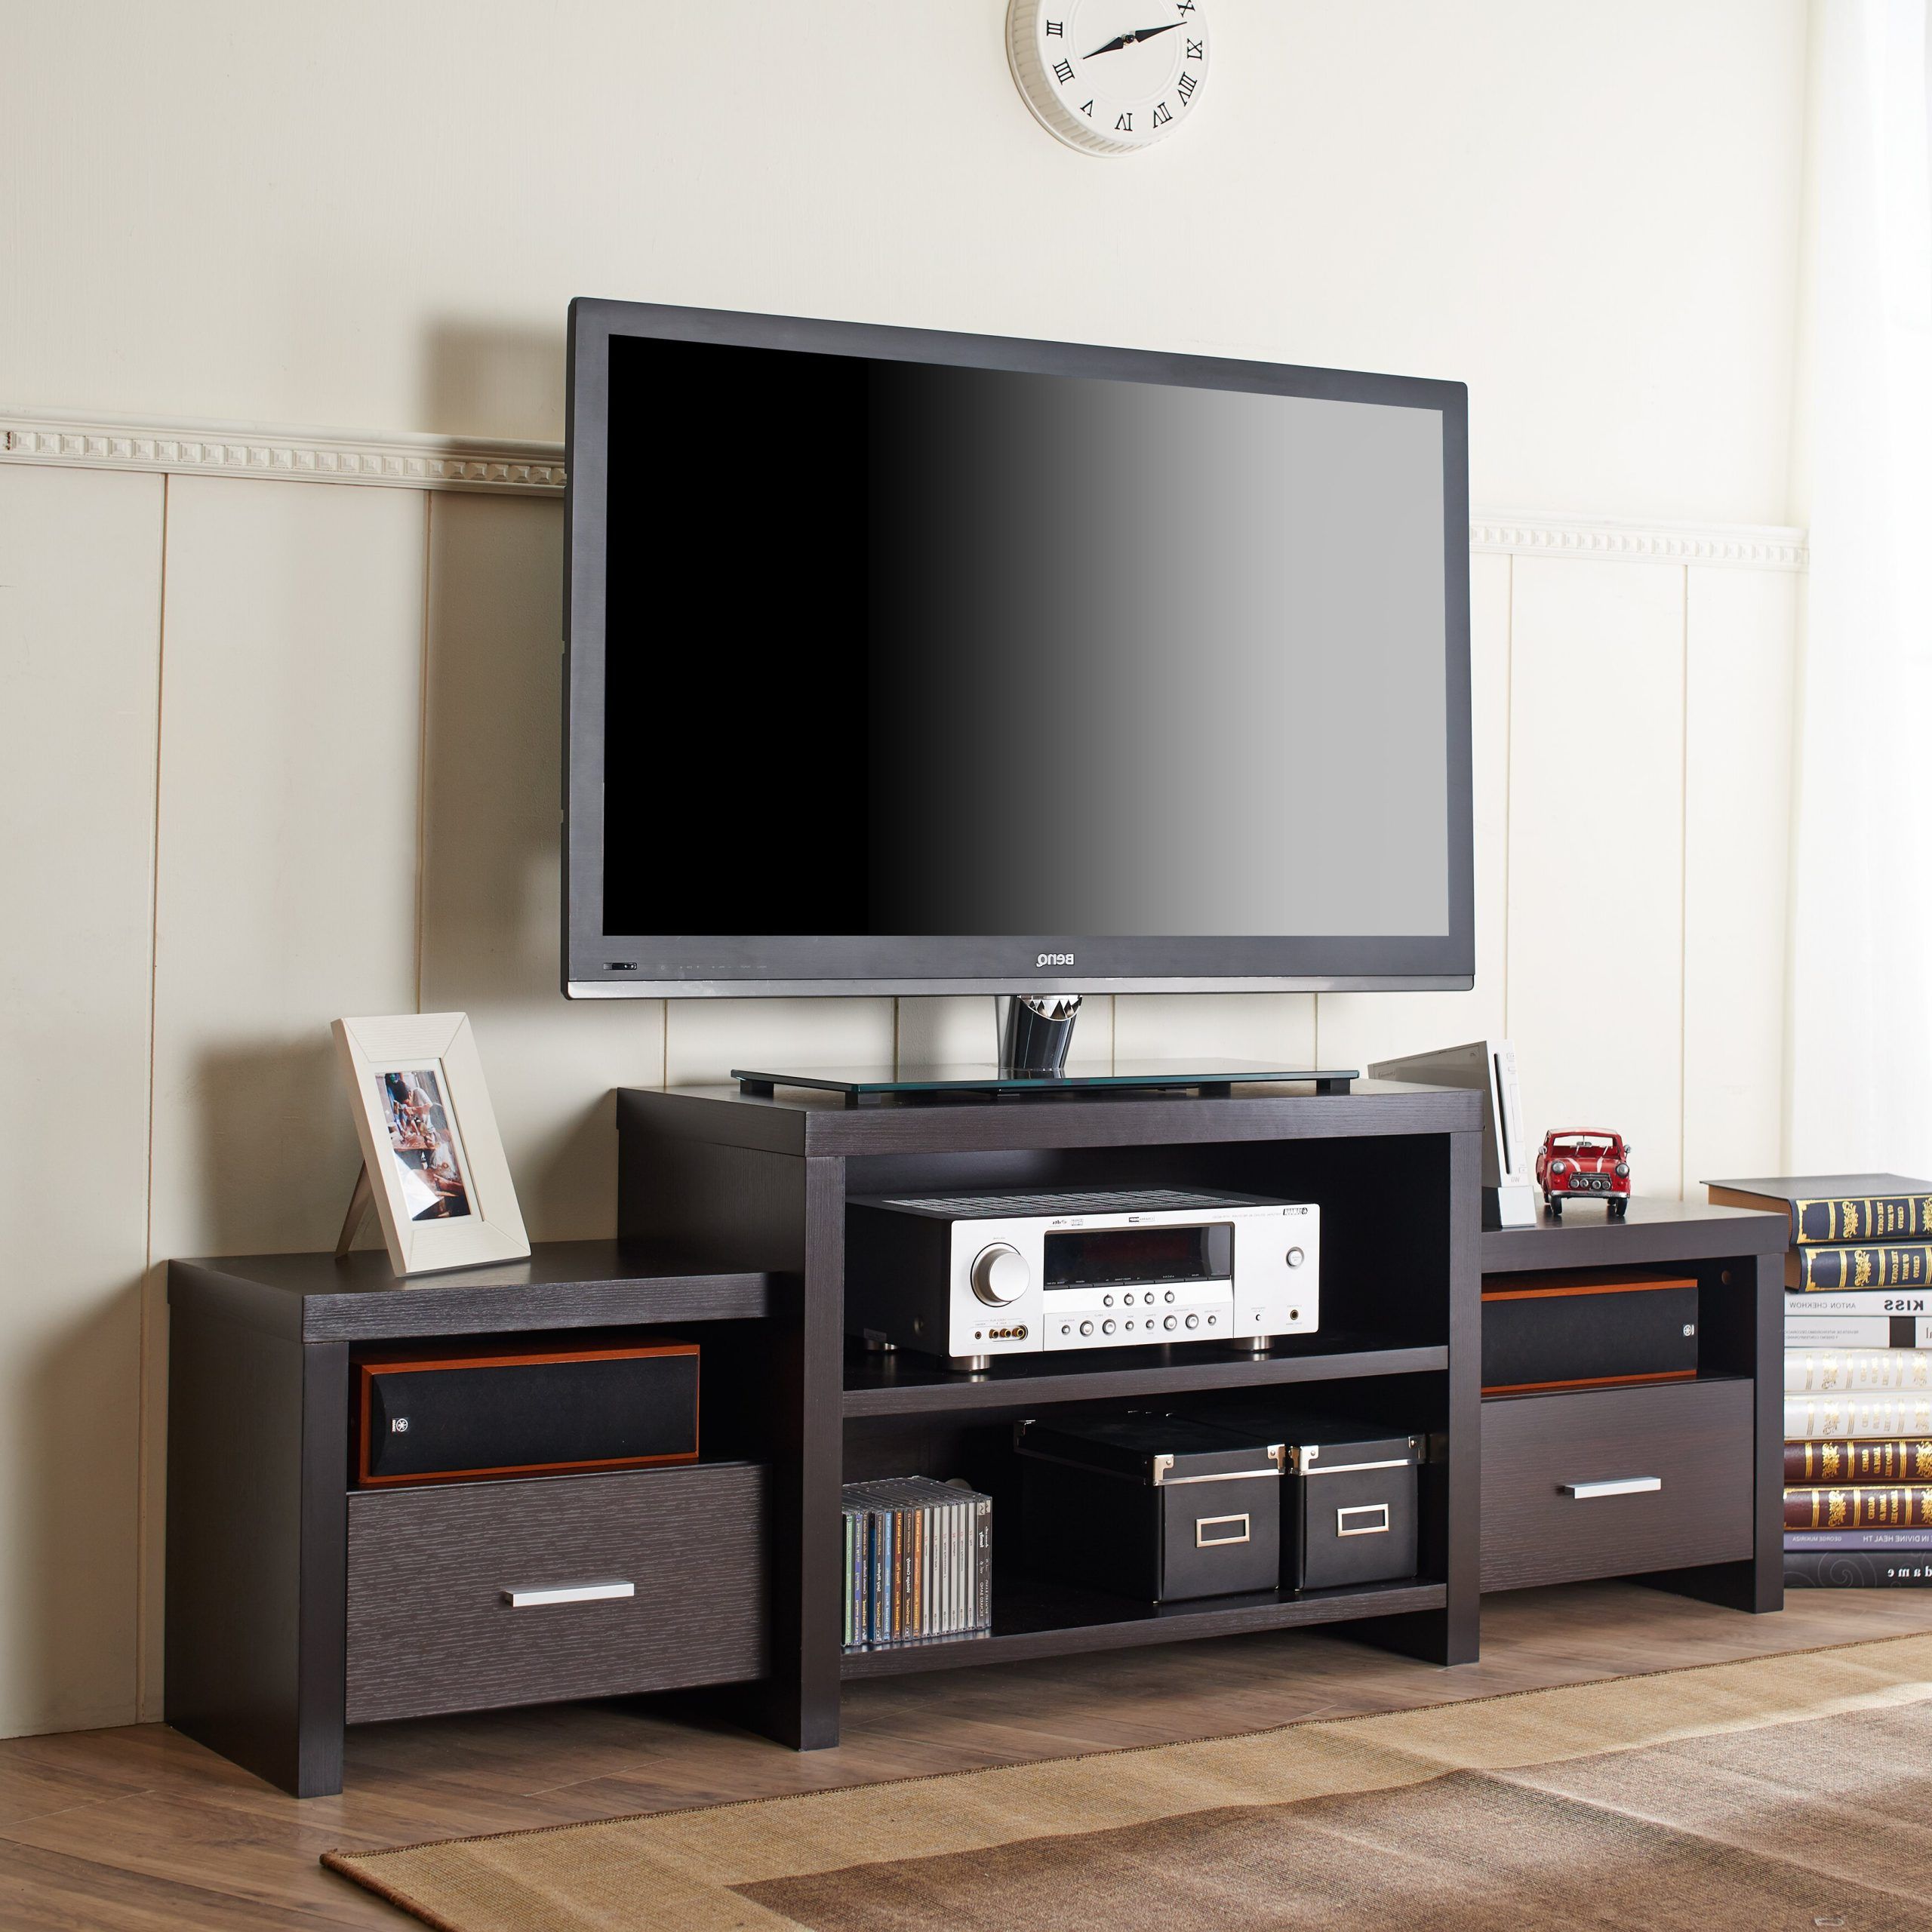 Widely Used Tier Stands For Tvs In Hokku Designs Bexten Tiered Tv Stand & Reviews (View 6 of 15)